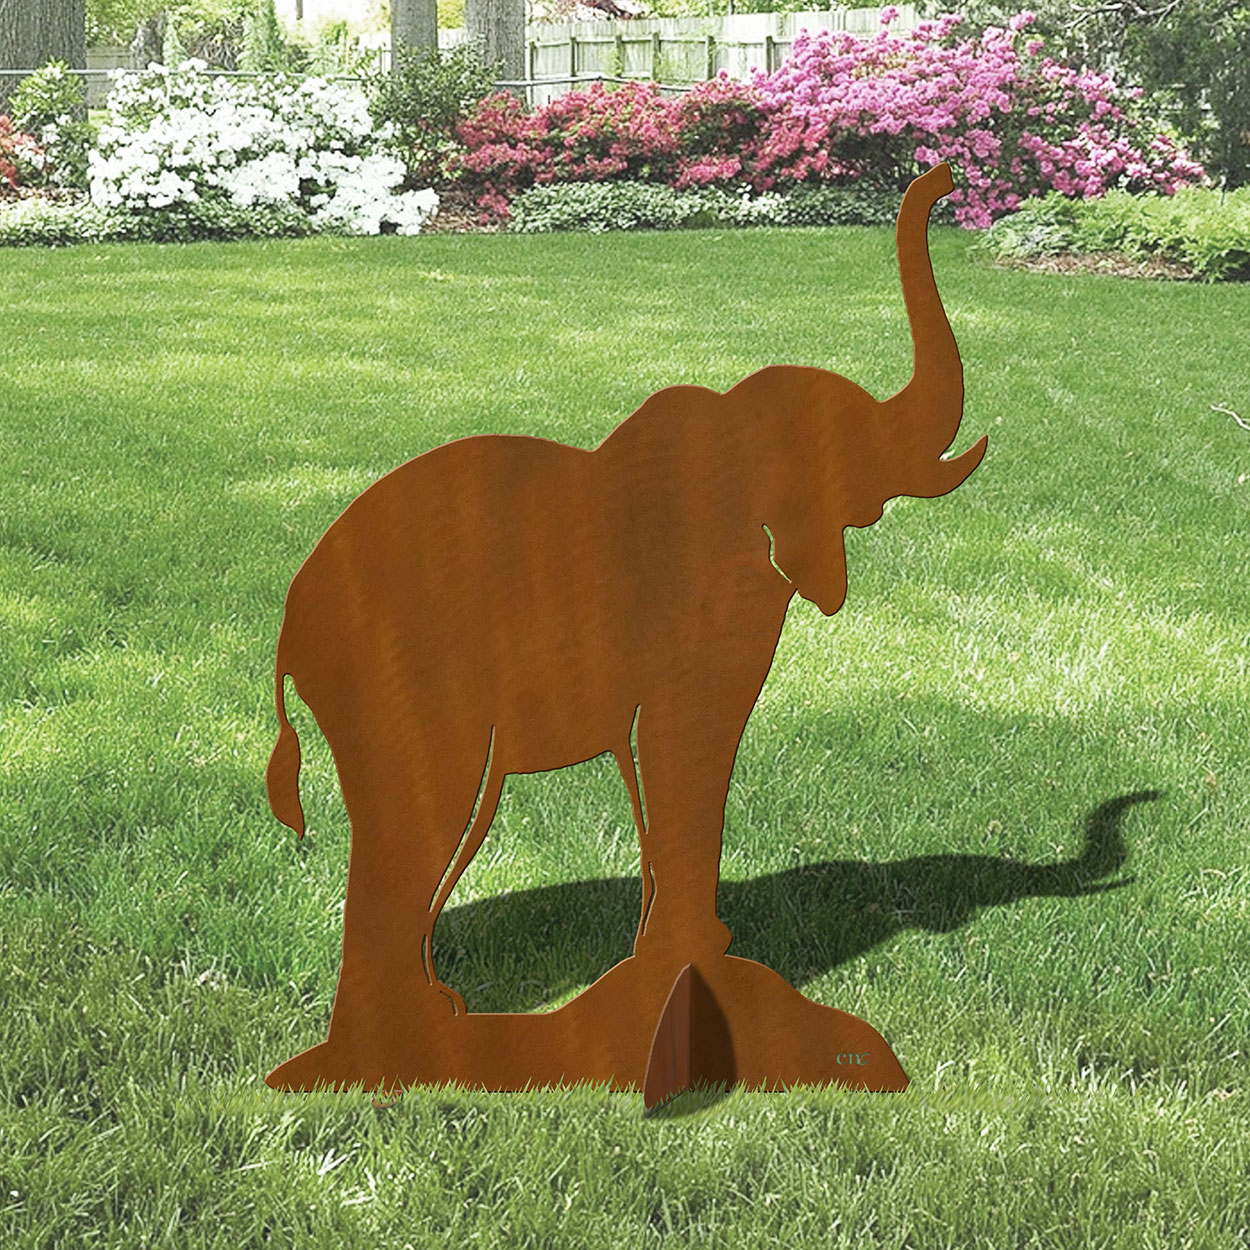 603226 - 36in H Elephant Large Metal Lawn Ornament in Rust Patina